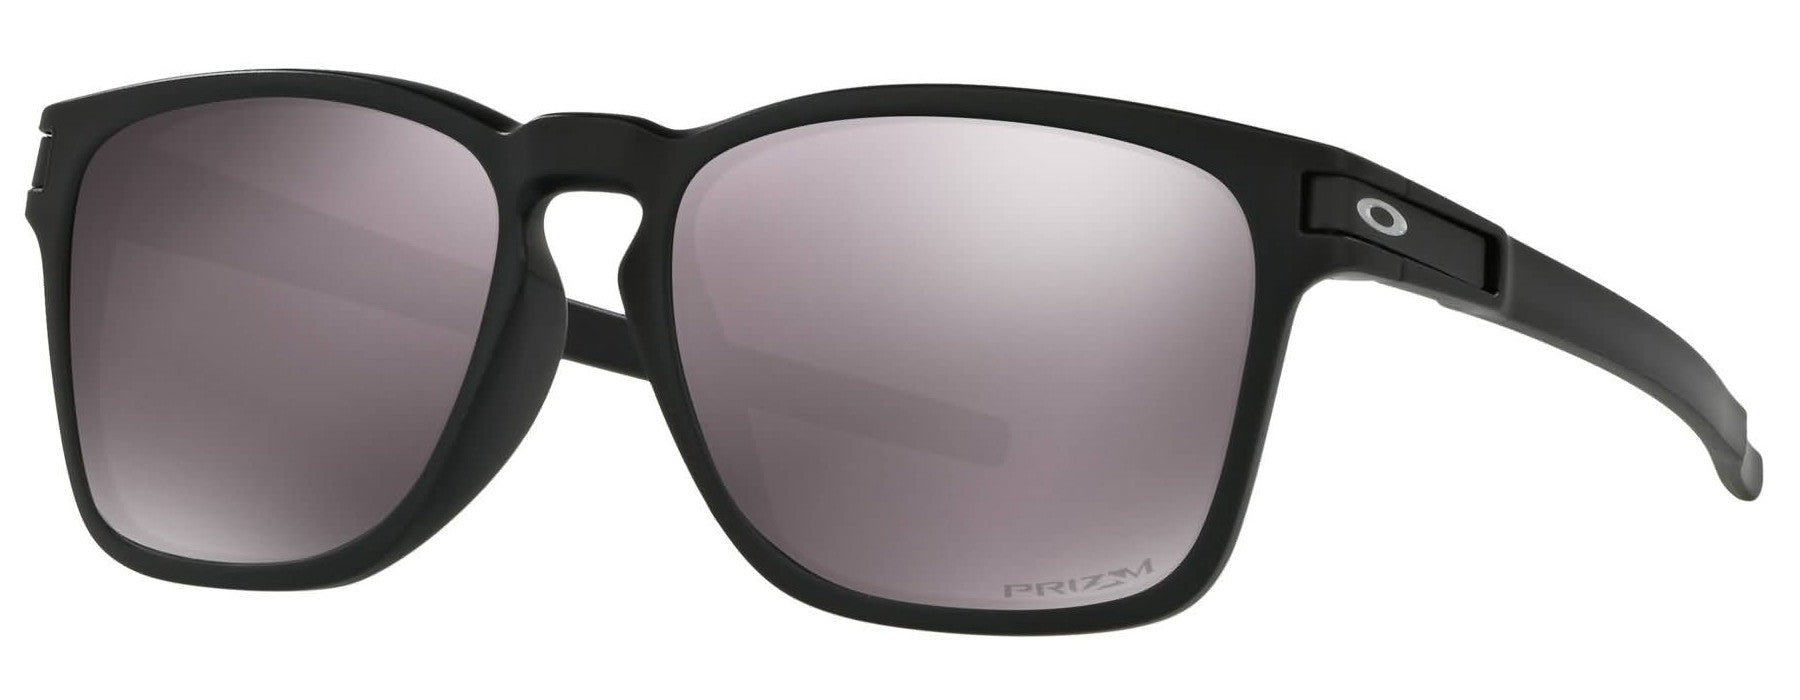 Oakley Introduces The Latch Sunglasses